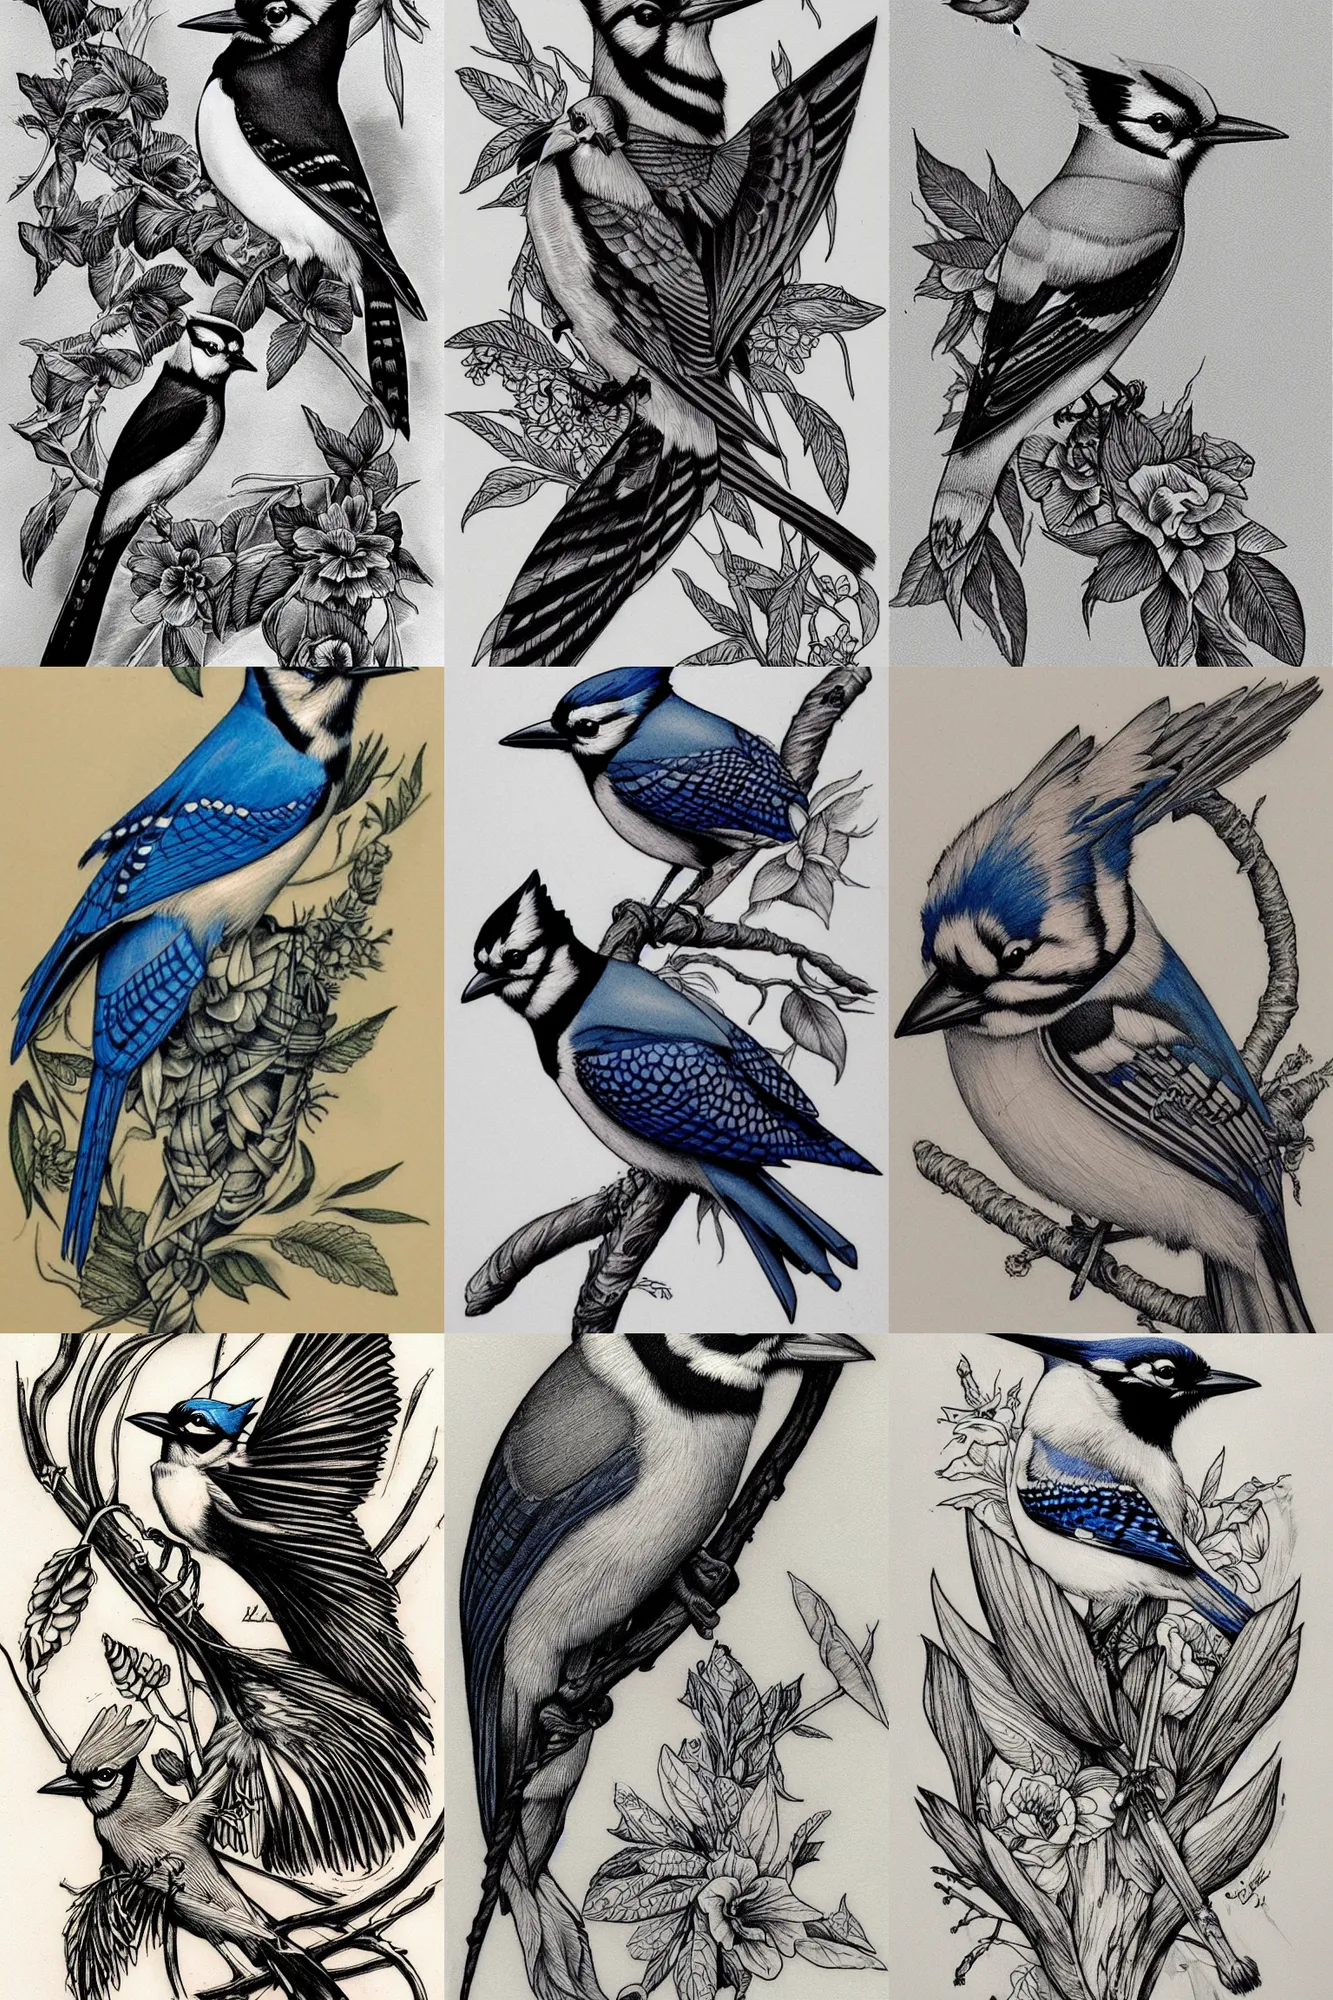 Prompt: tattoo design of a Bluejay by Bernie Wrightson